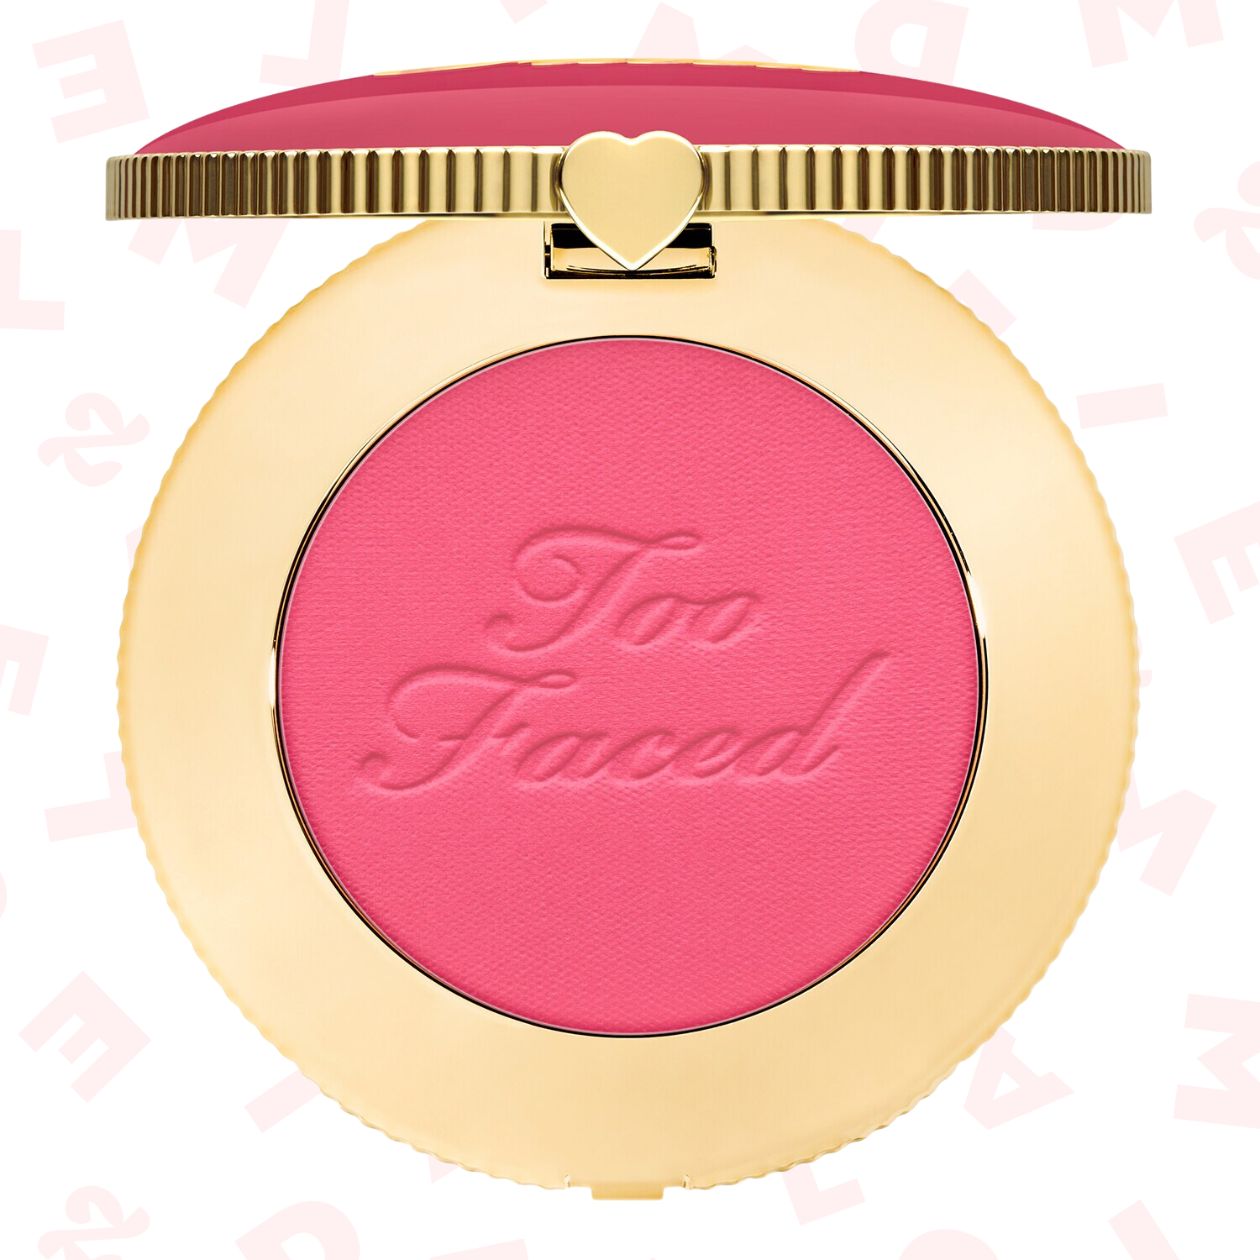 blush-poudre-too-faced